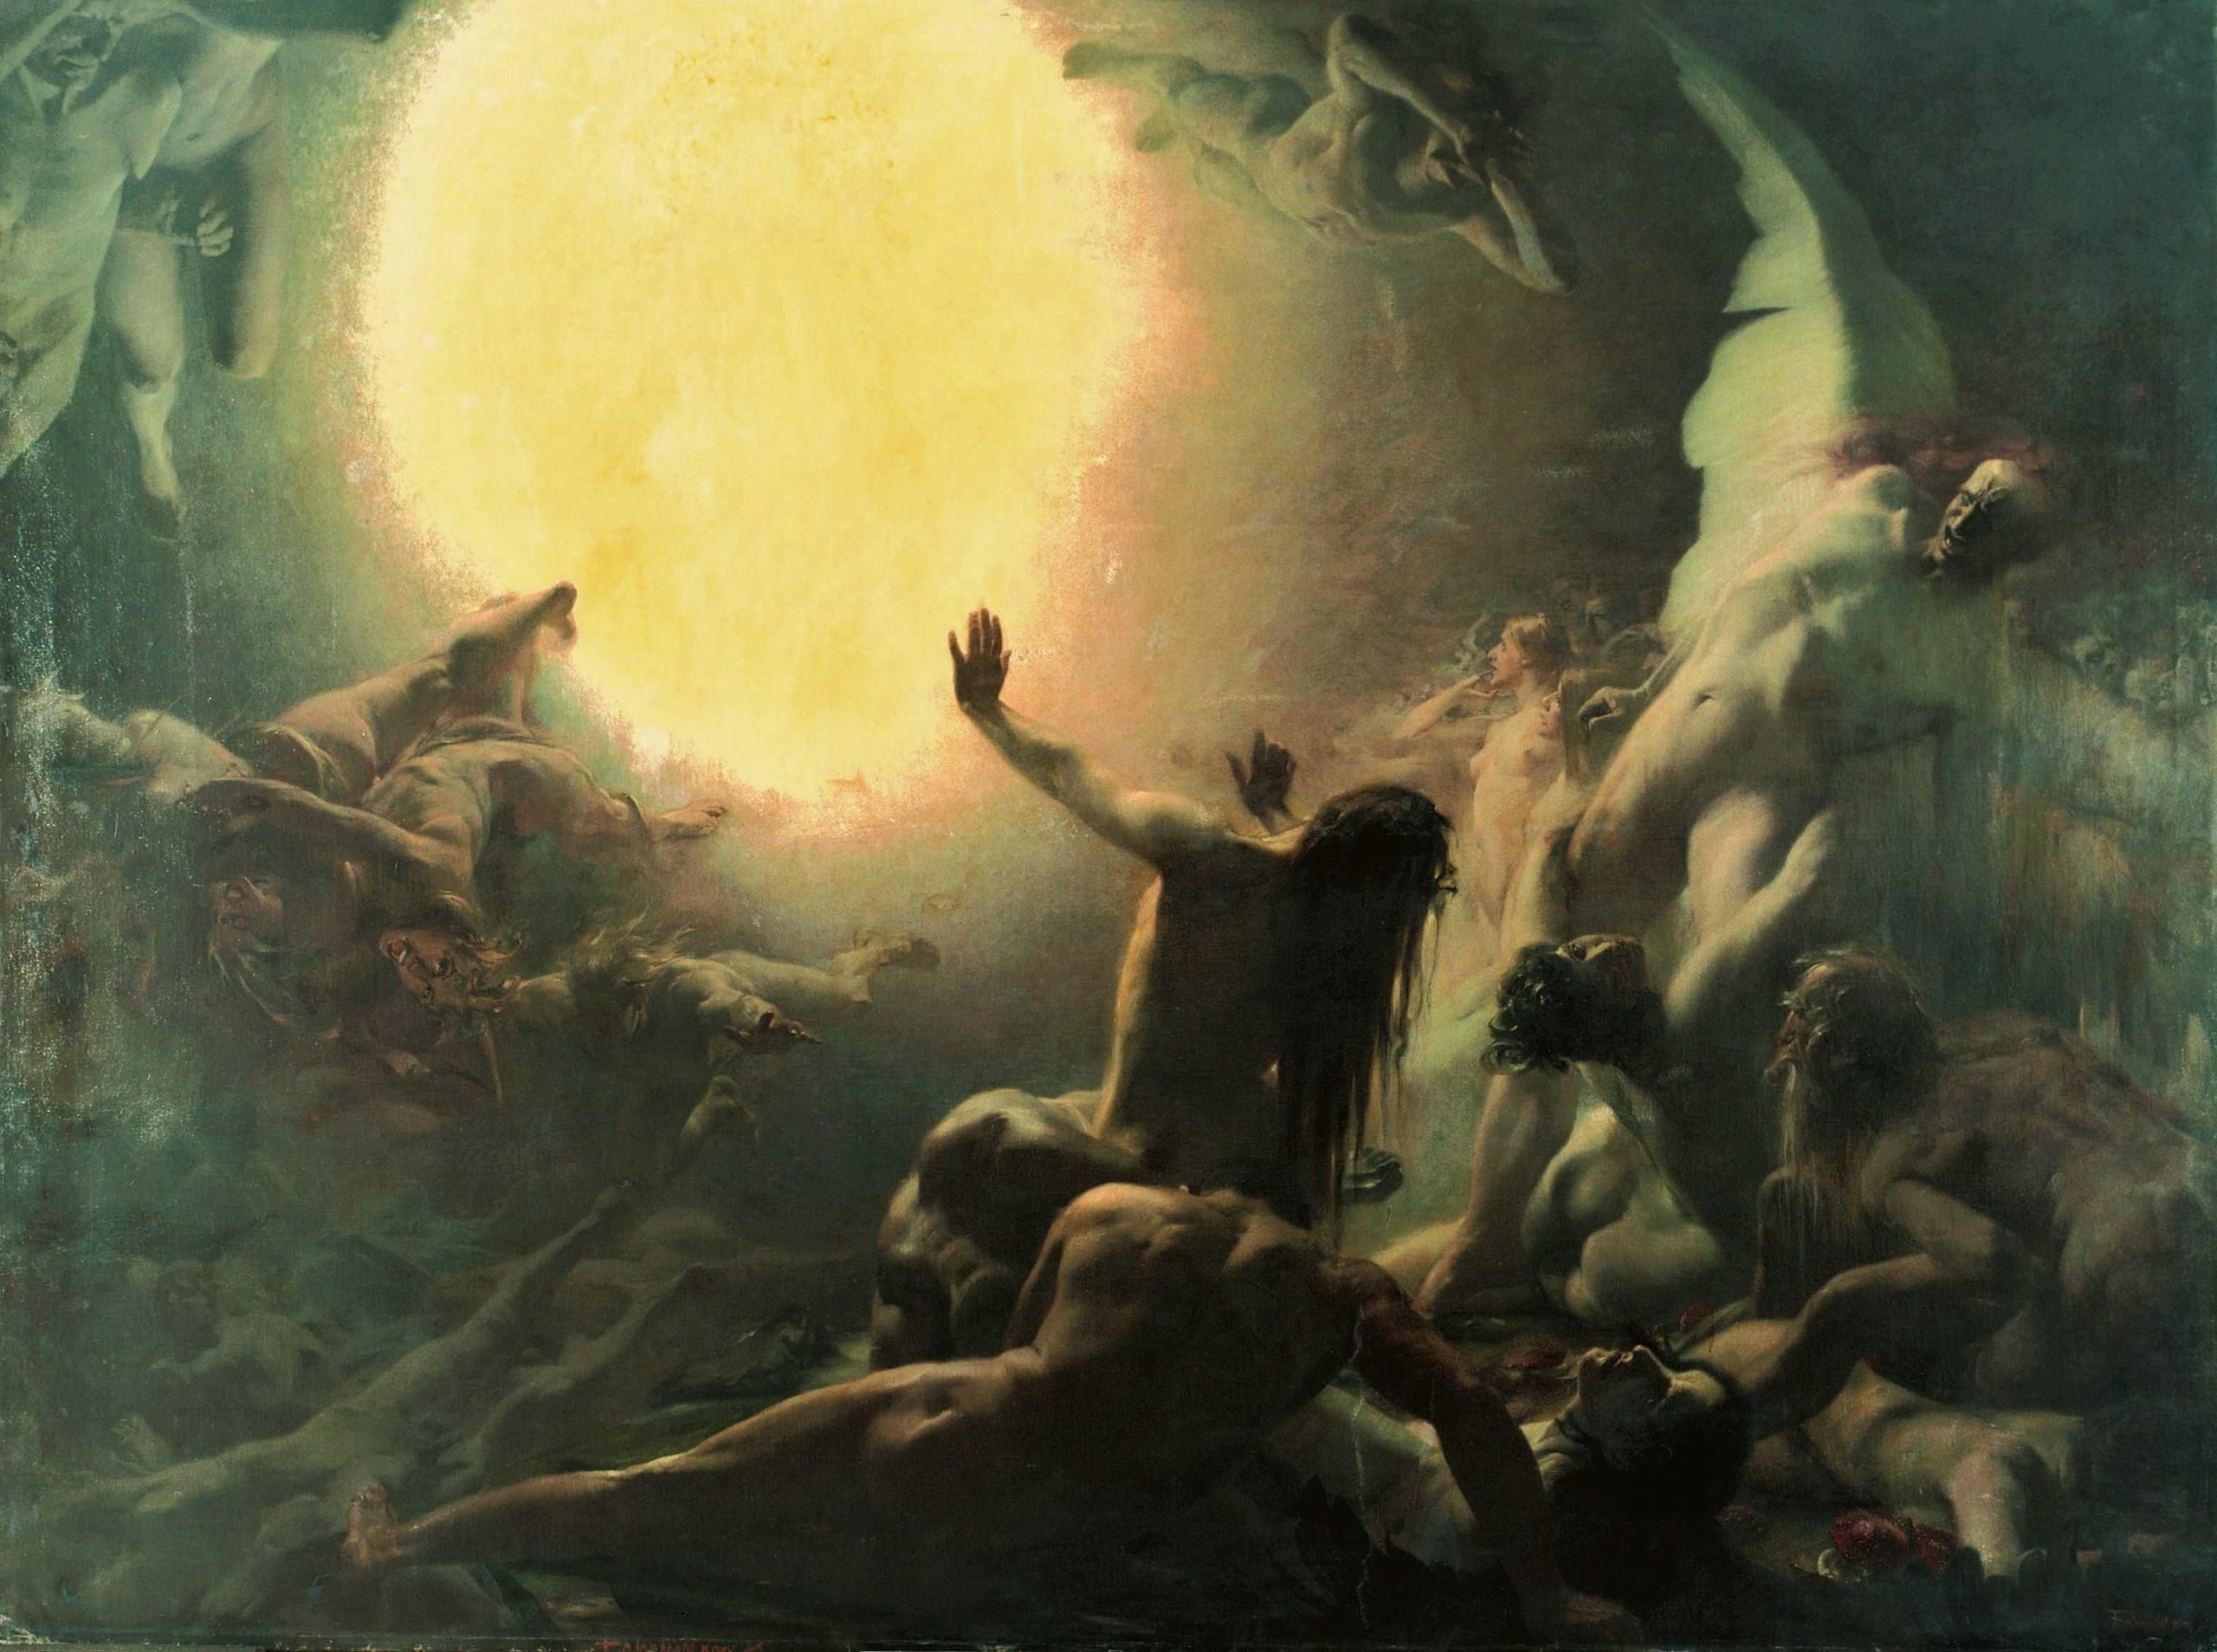 Ludwig Fahrenkrog. Victory of Light over Darkness. First half of the 20th century